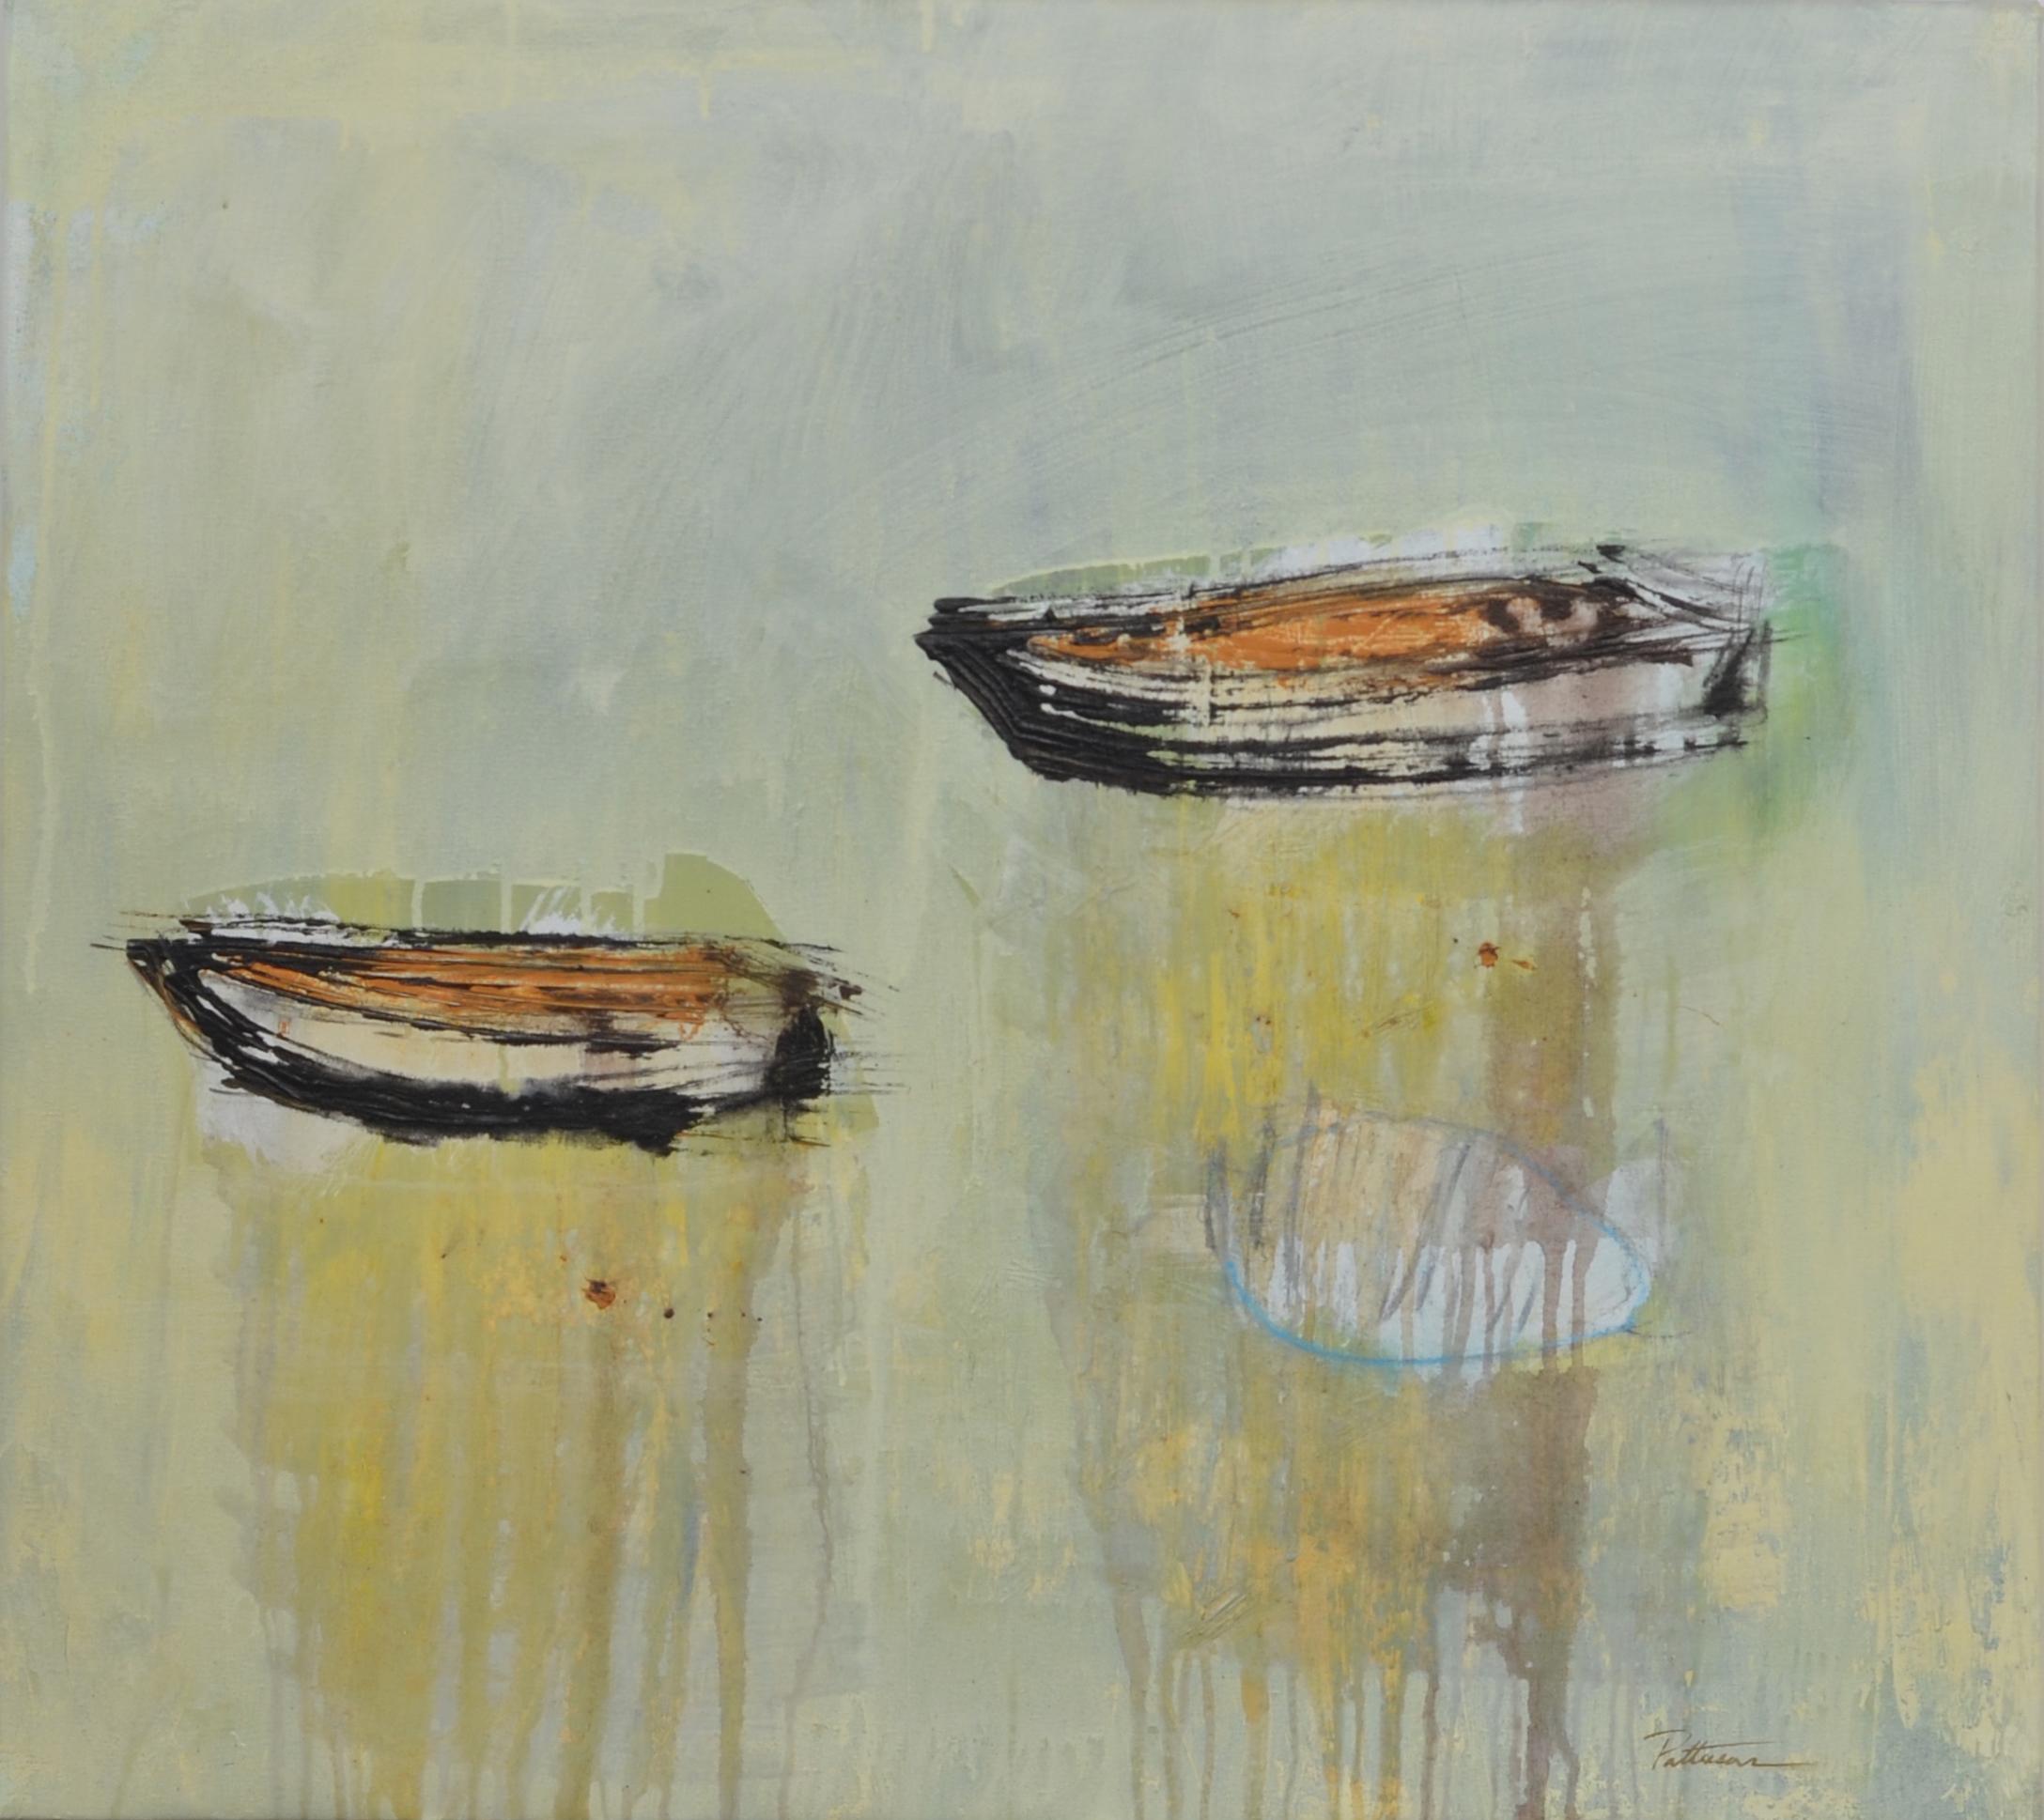 PATTERSON, Yendris Abstract Painting - Patterson  6 Boats  Green  Golden acrylic painting